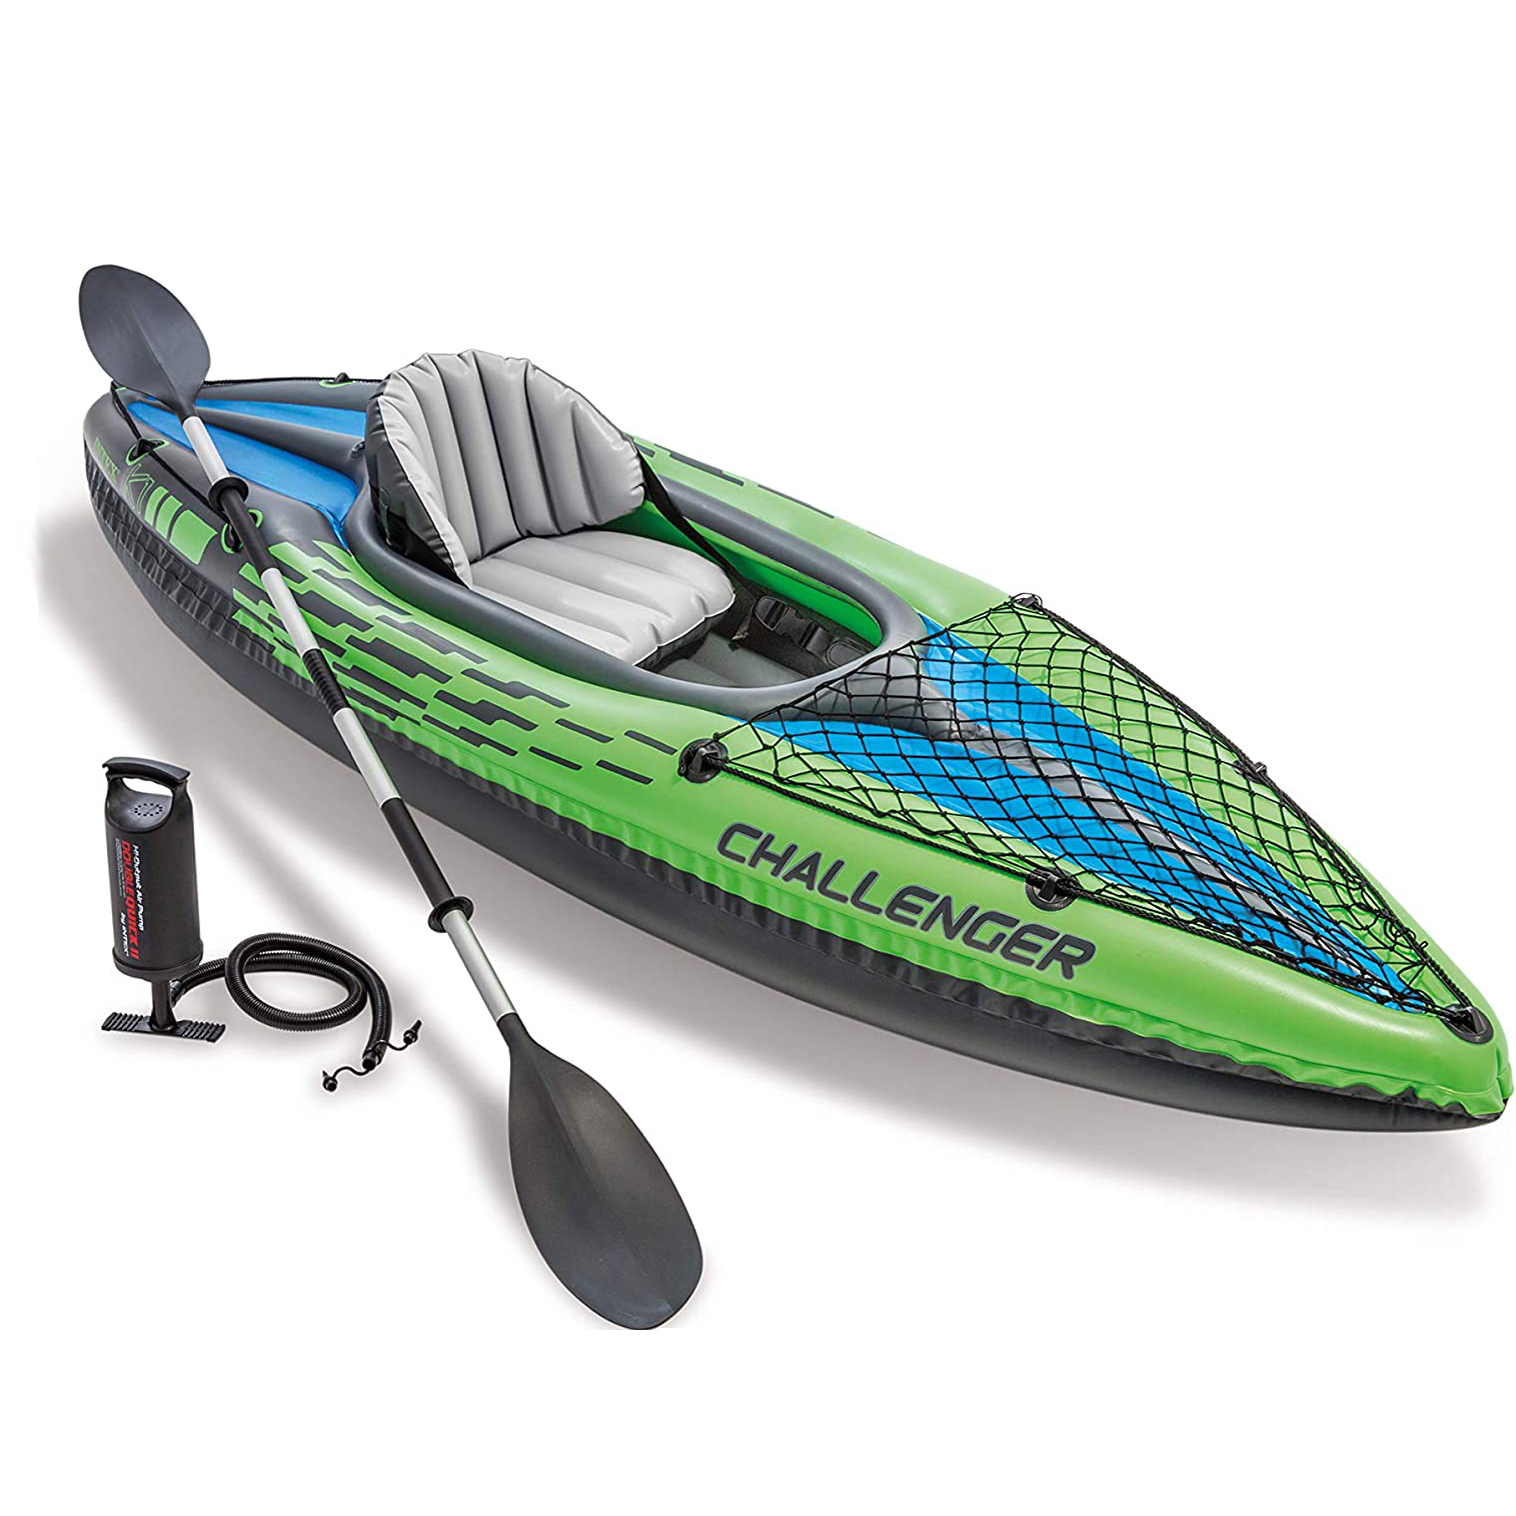 KuoRui 1-Person Inflatable Kayak Set with Aluminum Oars, Manual and Electric Pumps…